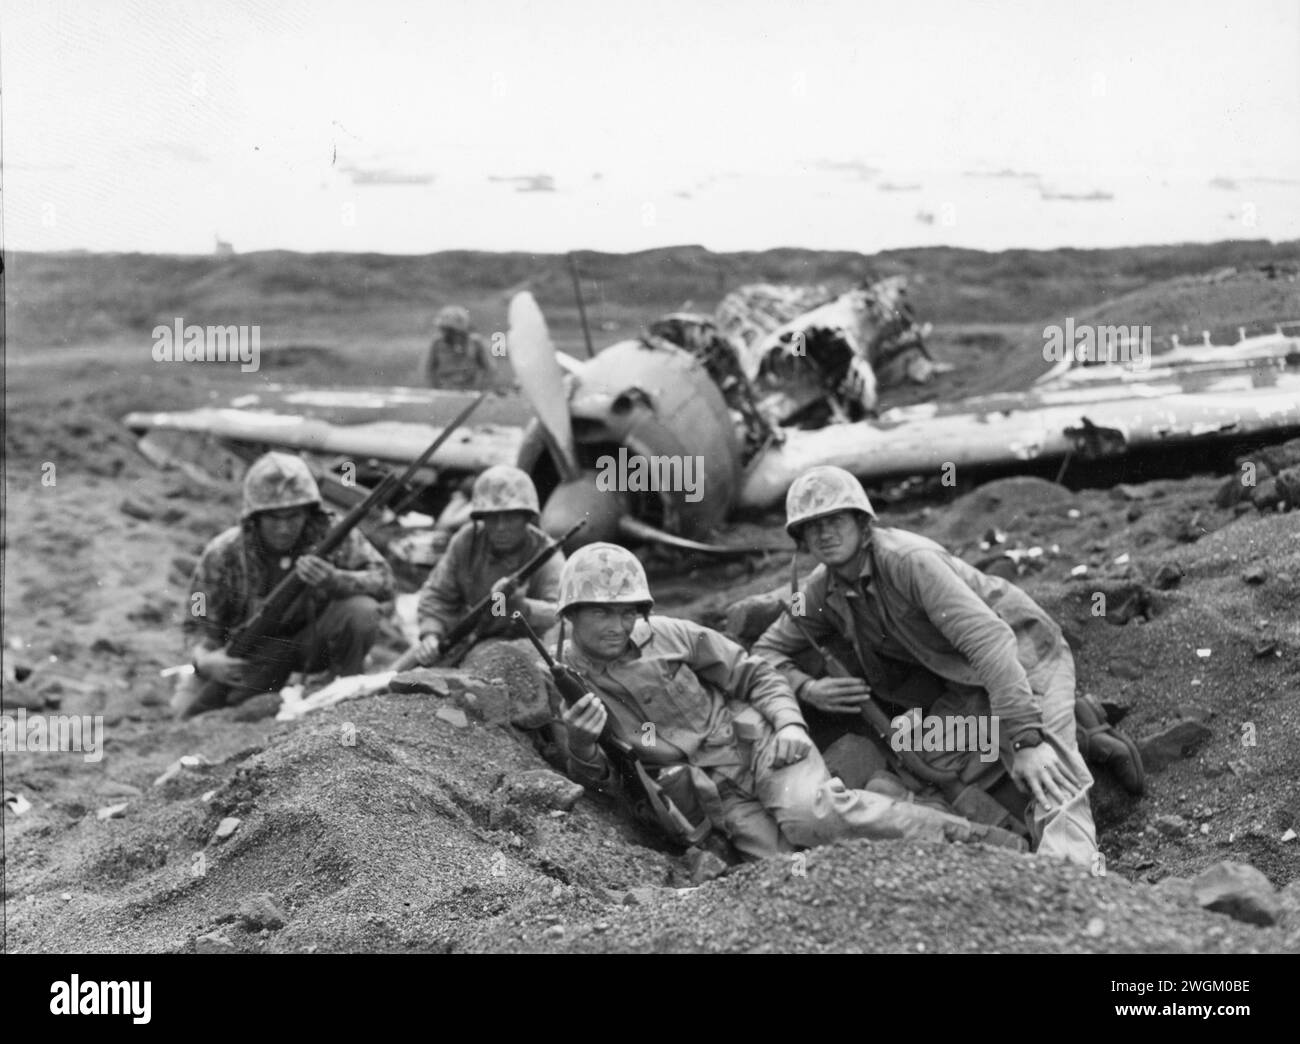 First Lieutenant Arthur Carley, from Ohio, finds shelter for his platoon near a wrecked Zero by Motoyama Airfield. Iwo Jima, Japan. 23 February, 1945. Company E, 2nd Battalion, 23rd Marine Regiment, 4th Marine Division. Stock Photo